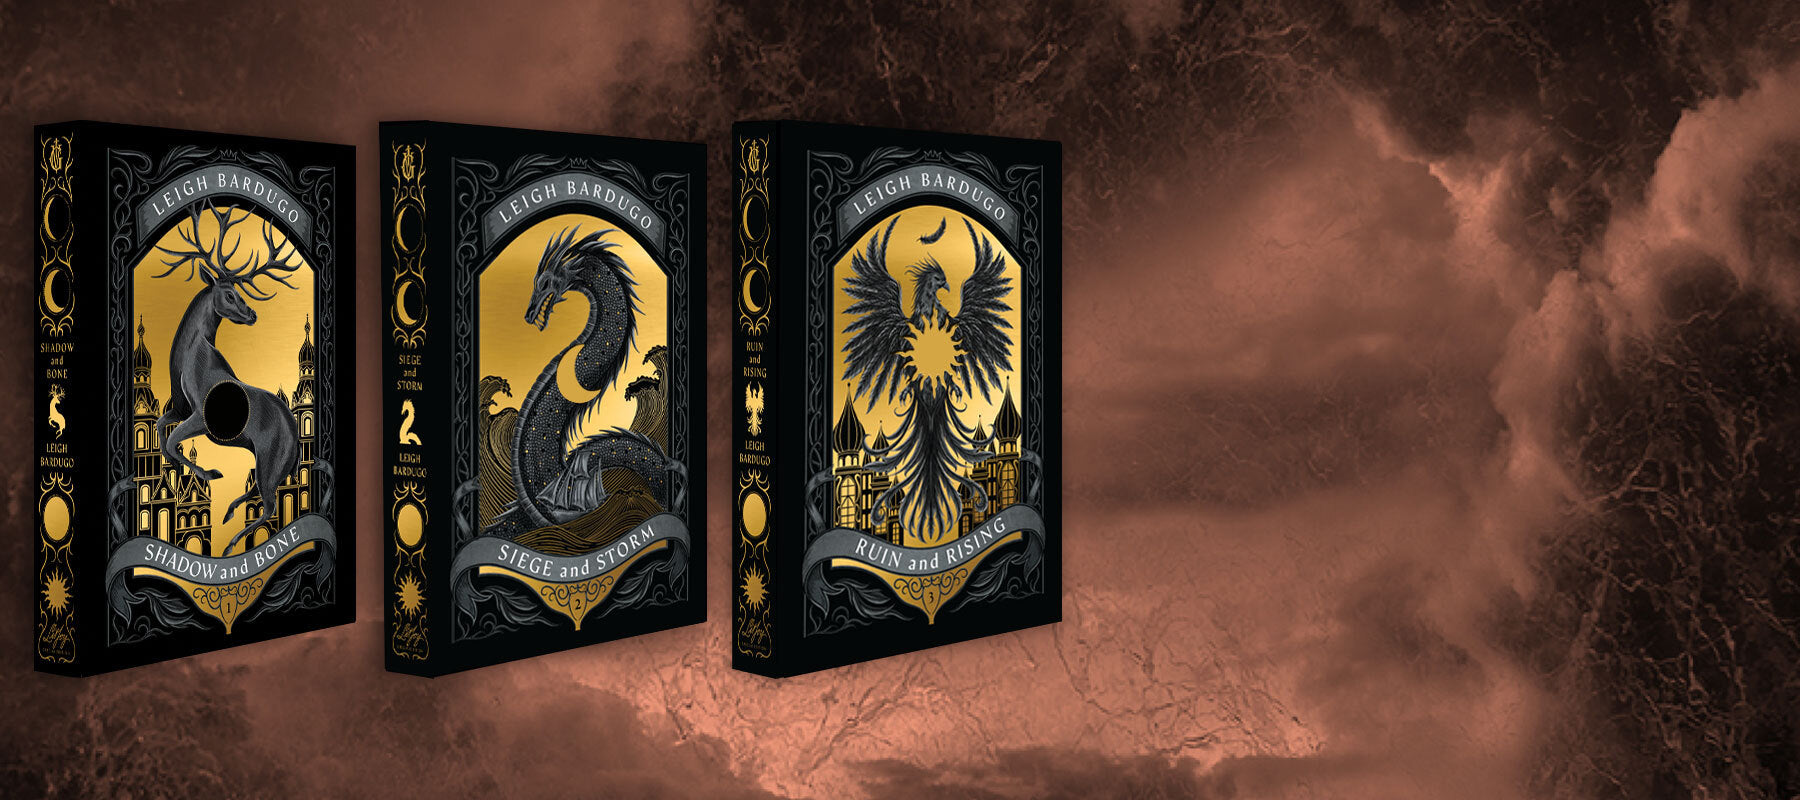 LitJoy's Edition of Shadow and Bone by Leigh Barduo, featuring gold foiled cover dust jackets of the stag, sea whip, and firebird amplifiers with die cuts of eclipse, crescent moon, and sun